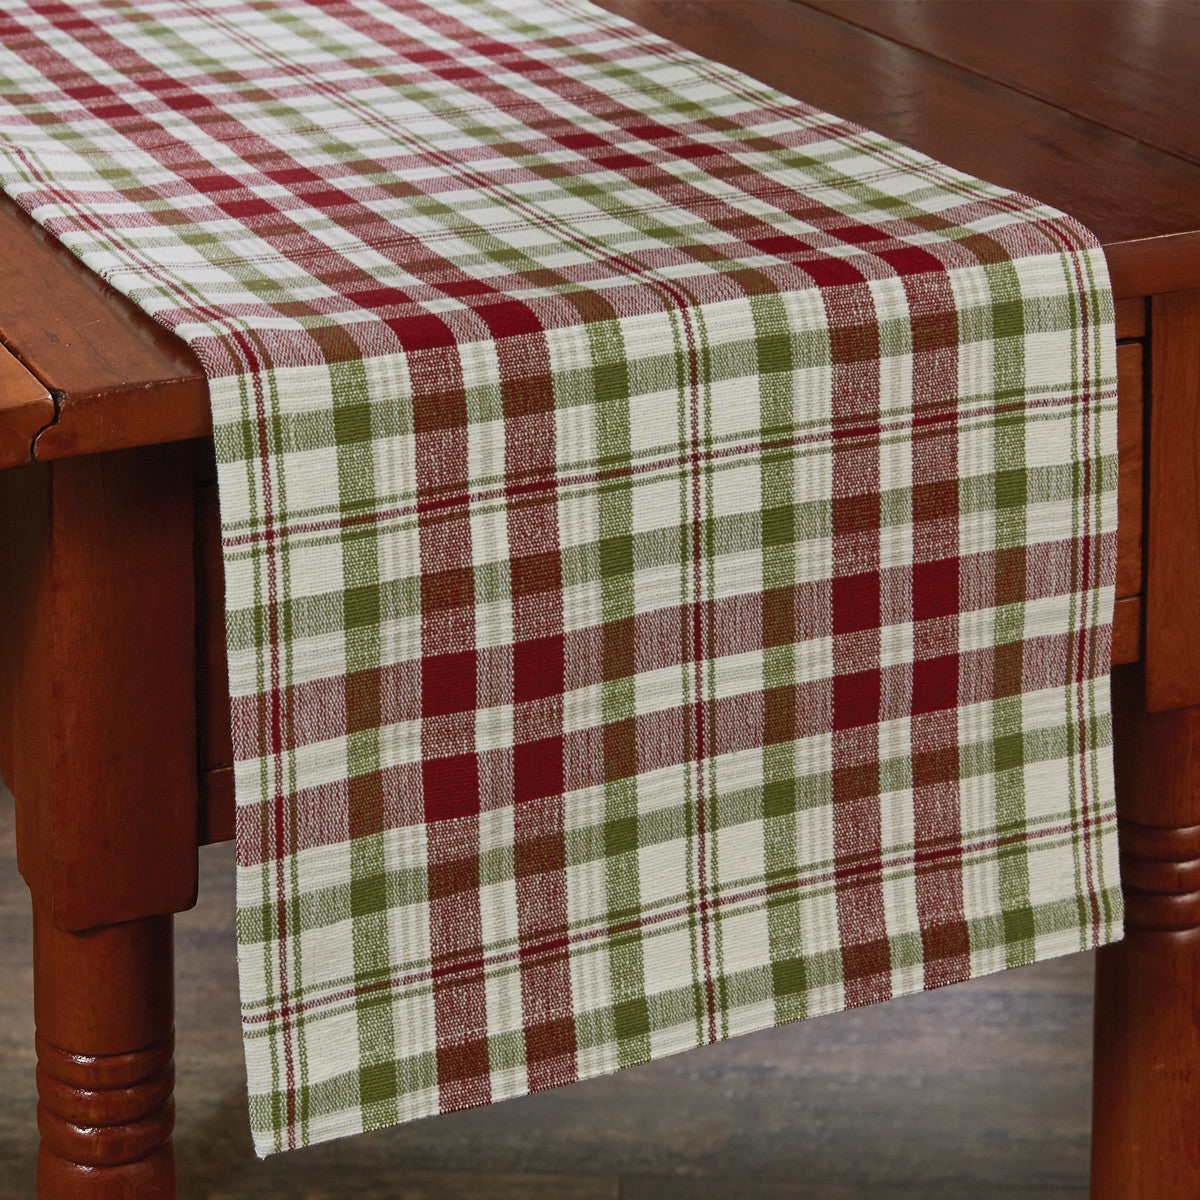 Town Square Table Runner - 54"L Park Designs